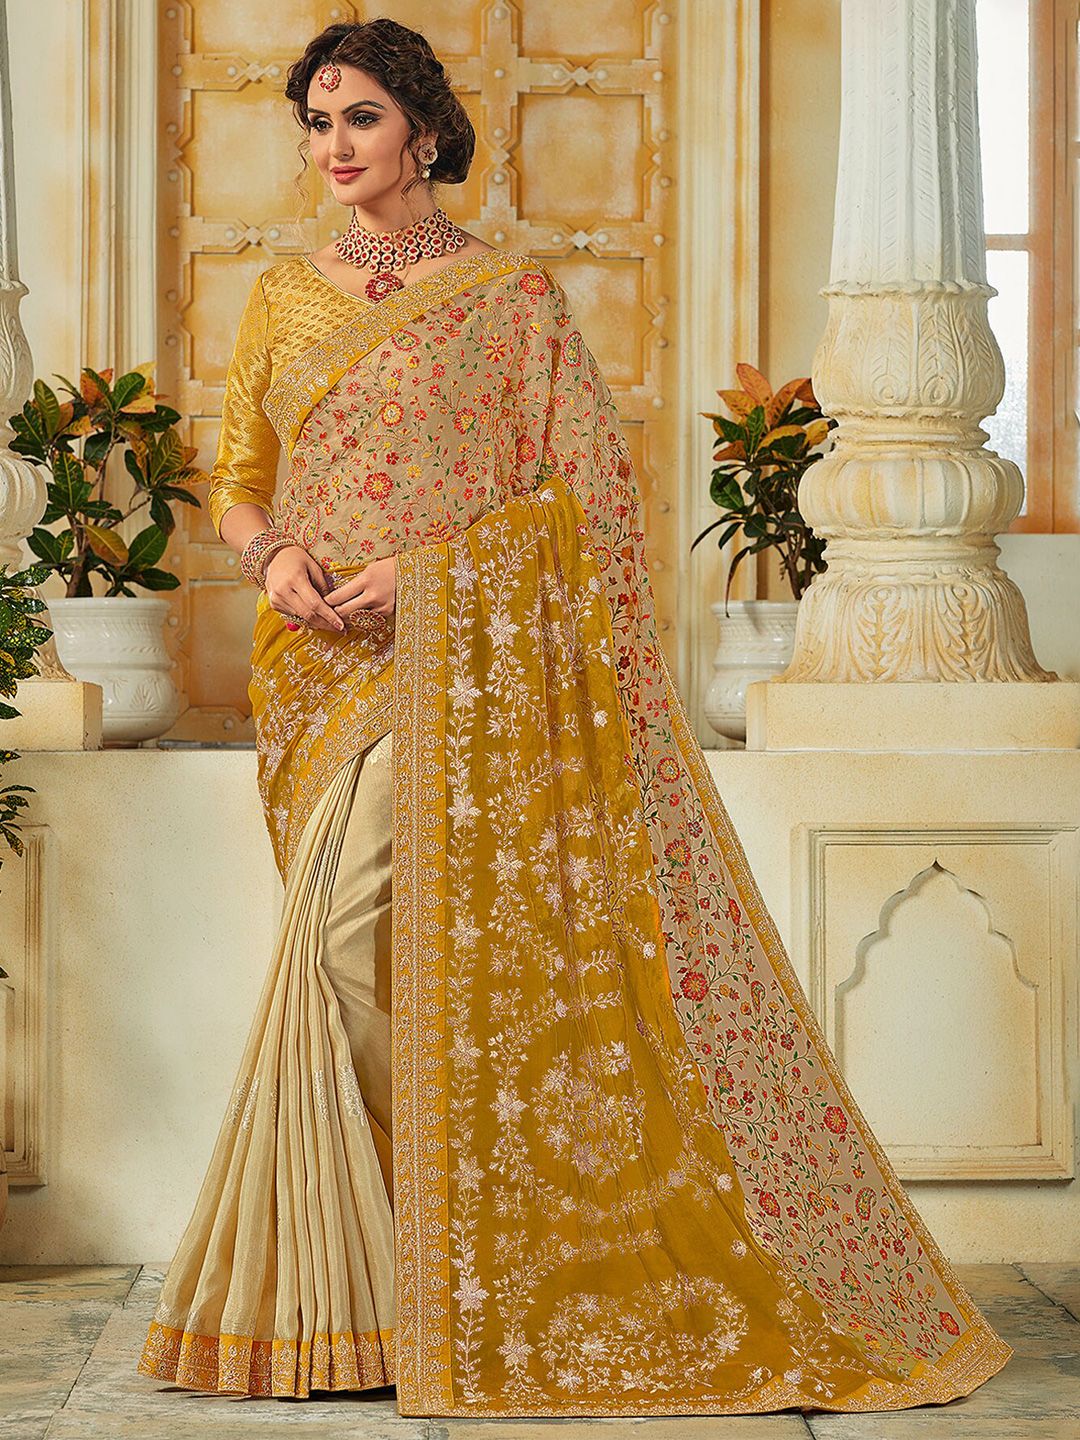 Laxmipati Floral Embroidered Saree Price in India